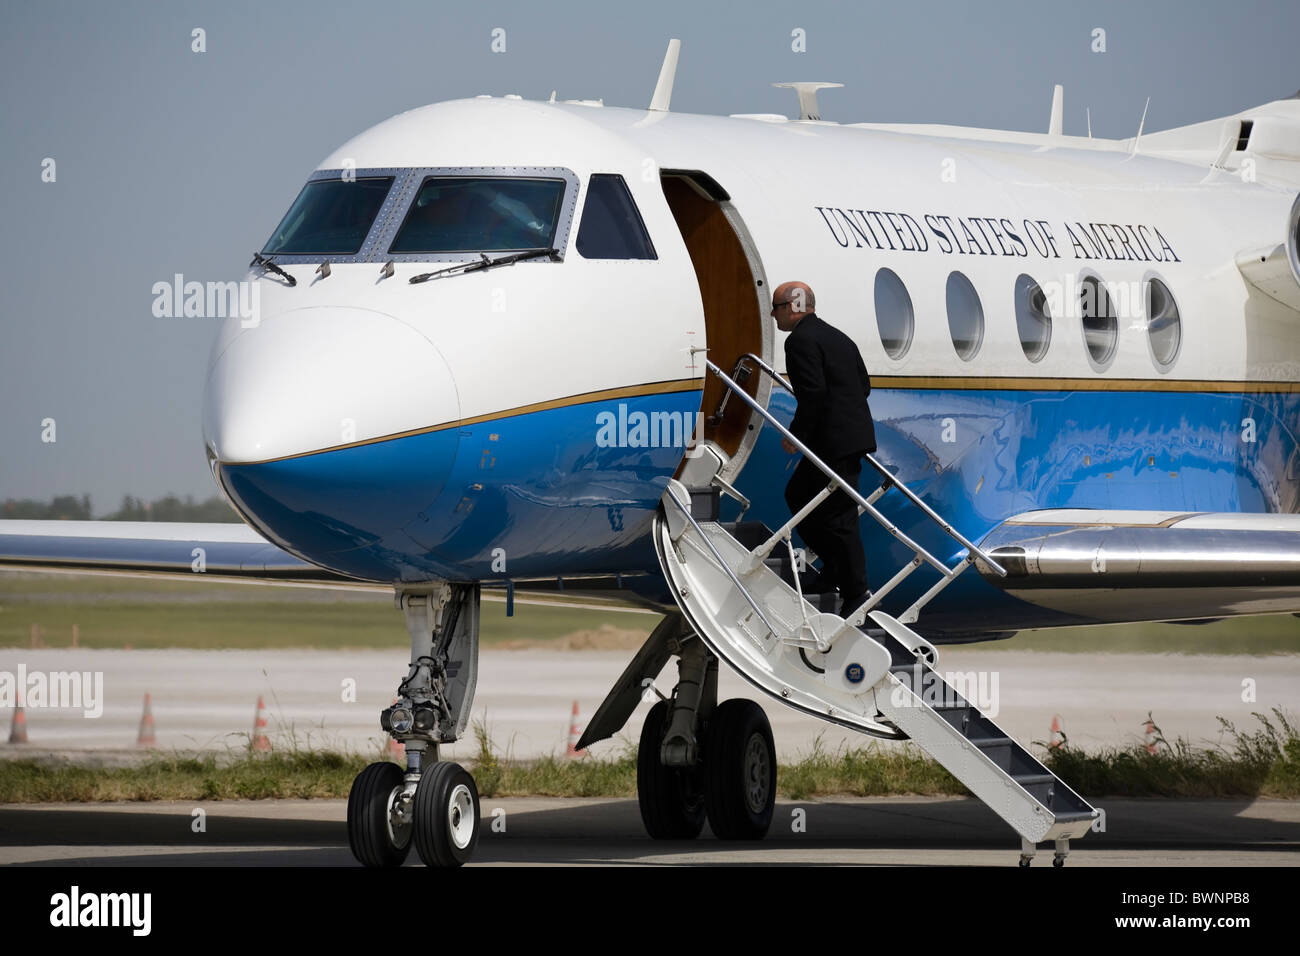 Visit of VIPs, bodyguard at work, US Air Force jet Aerospace C-37A Gulfstream waiting for a VIP at airport Stock Photo